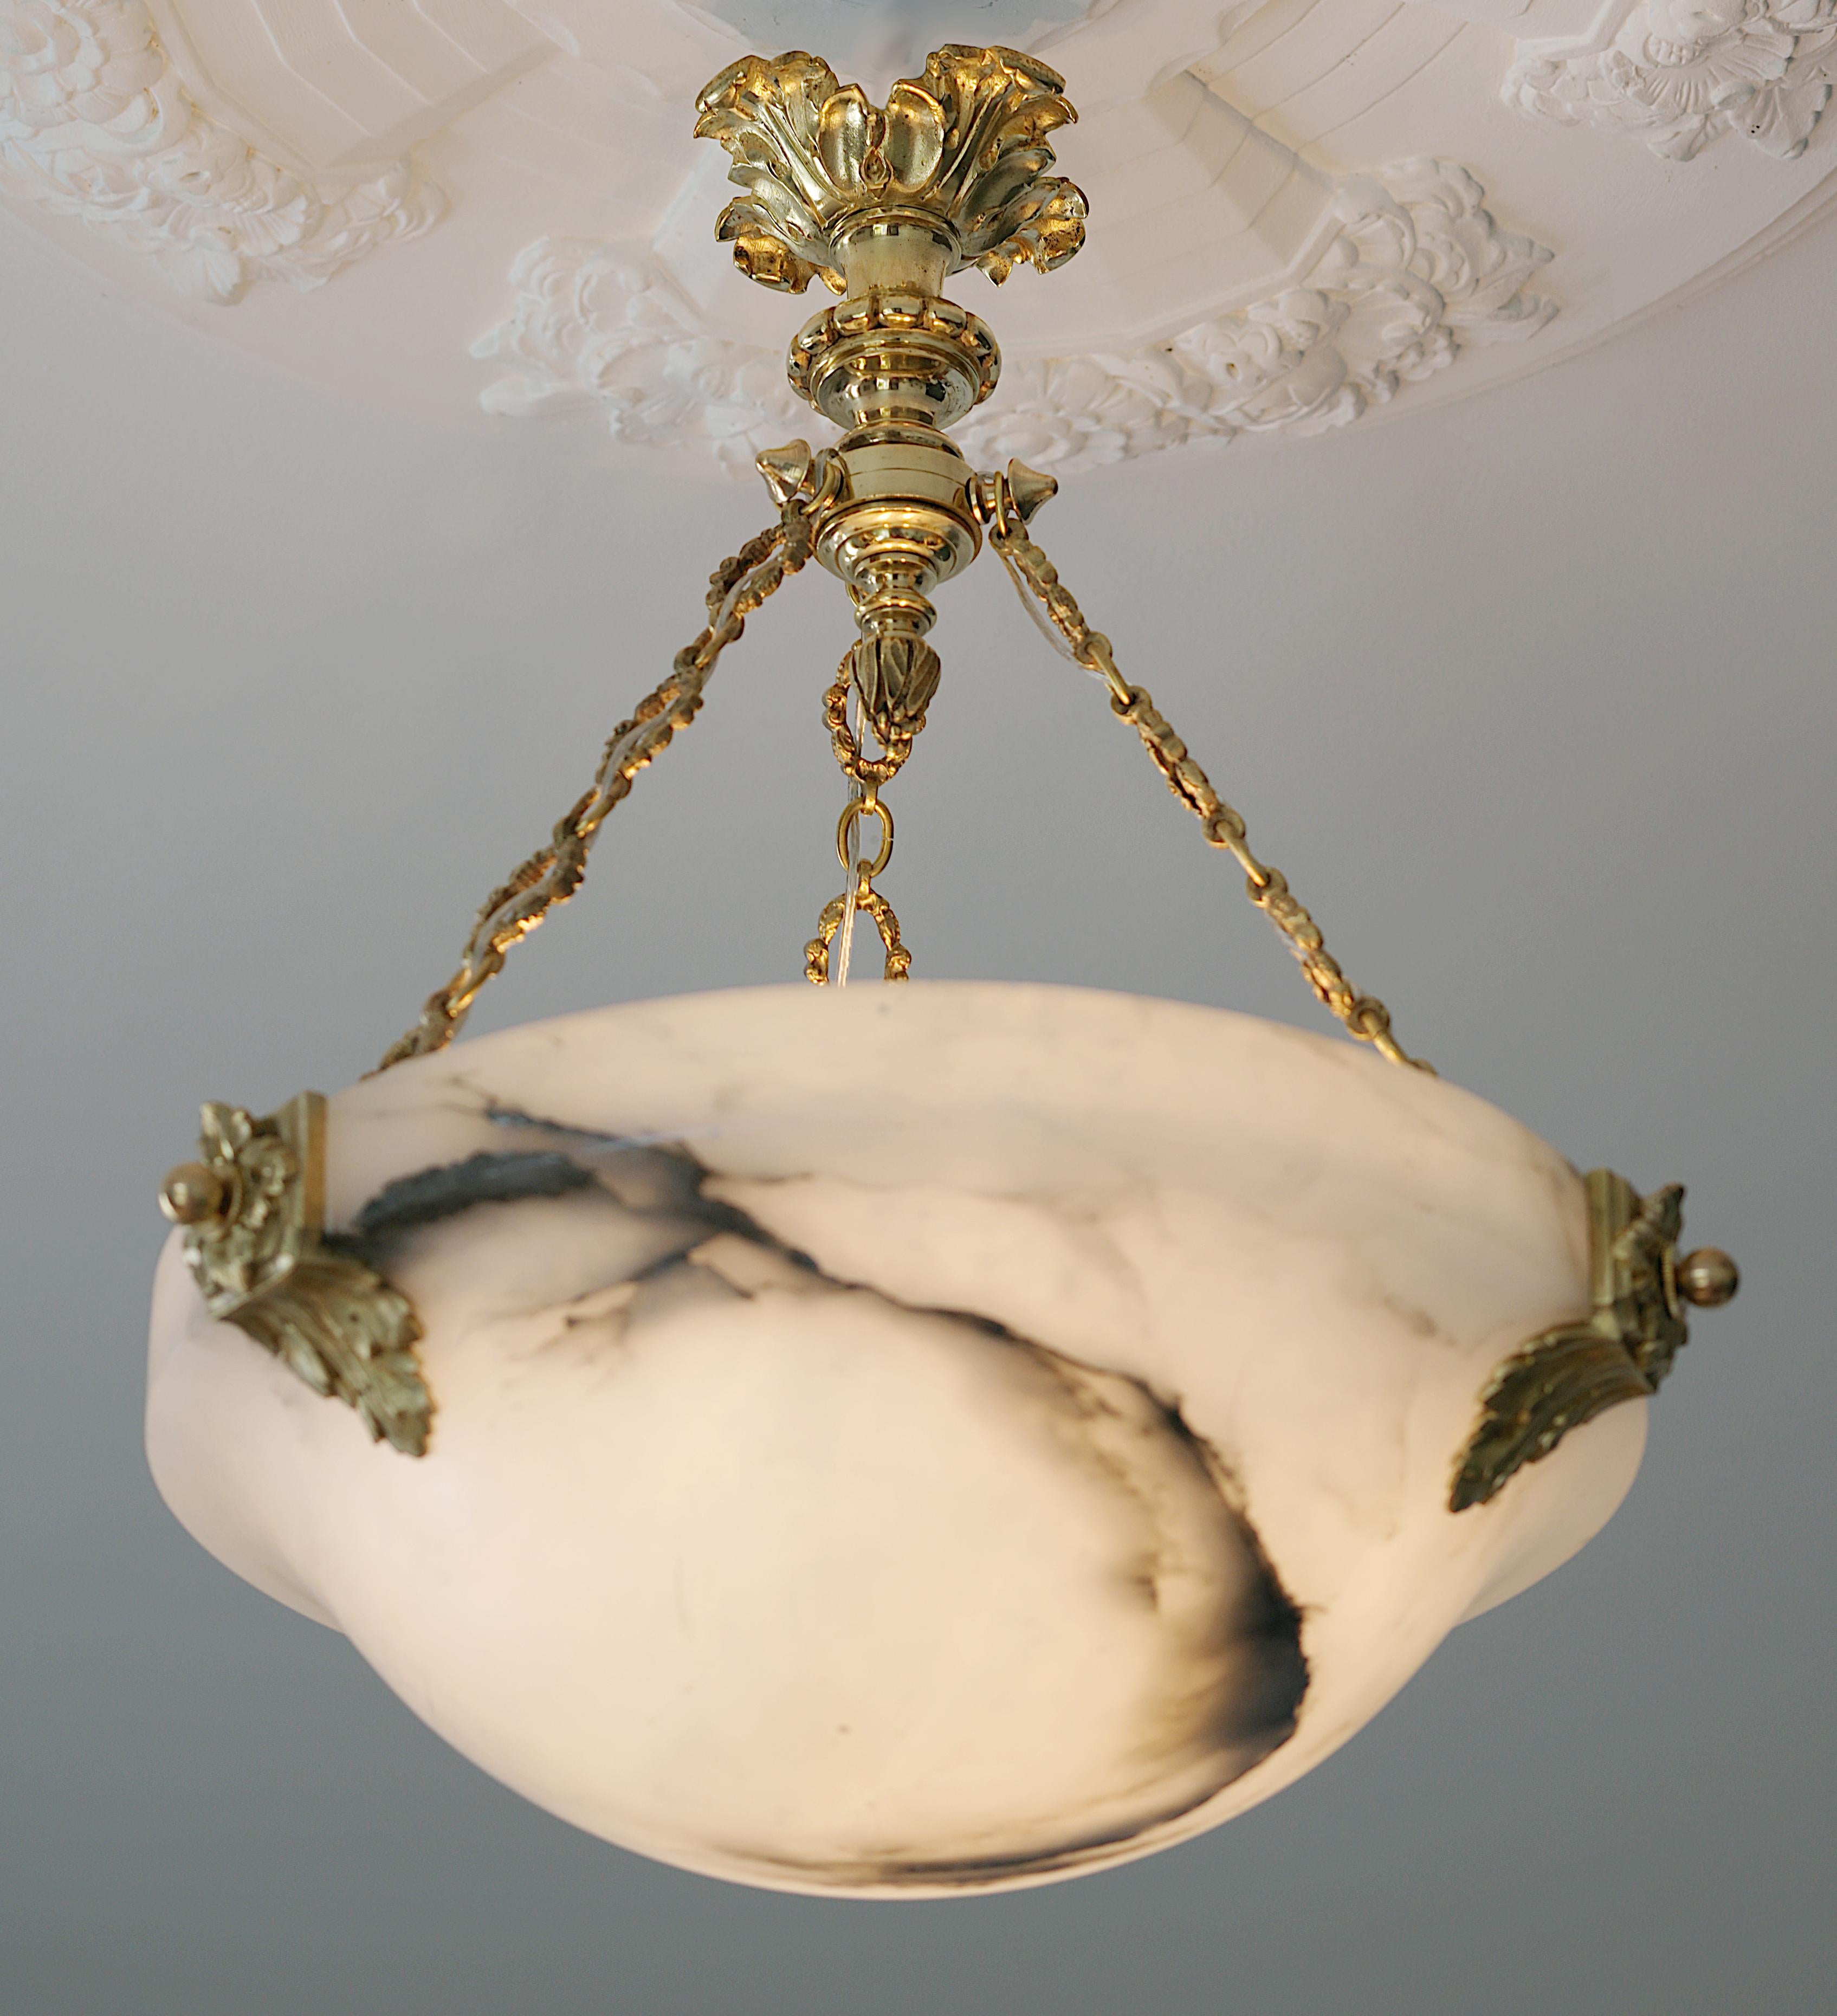 French ArtDeco alabaster and bronze pendant chandelier, France, 1920s. Alabaster shade hung at its gorgeous bronze fixture. Old alabaster cannot be compared to new ones. Old alabaster has veins. Sometimes they can be mistaken for cracks. But they